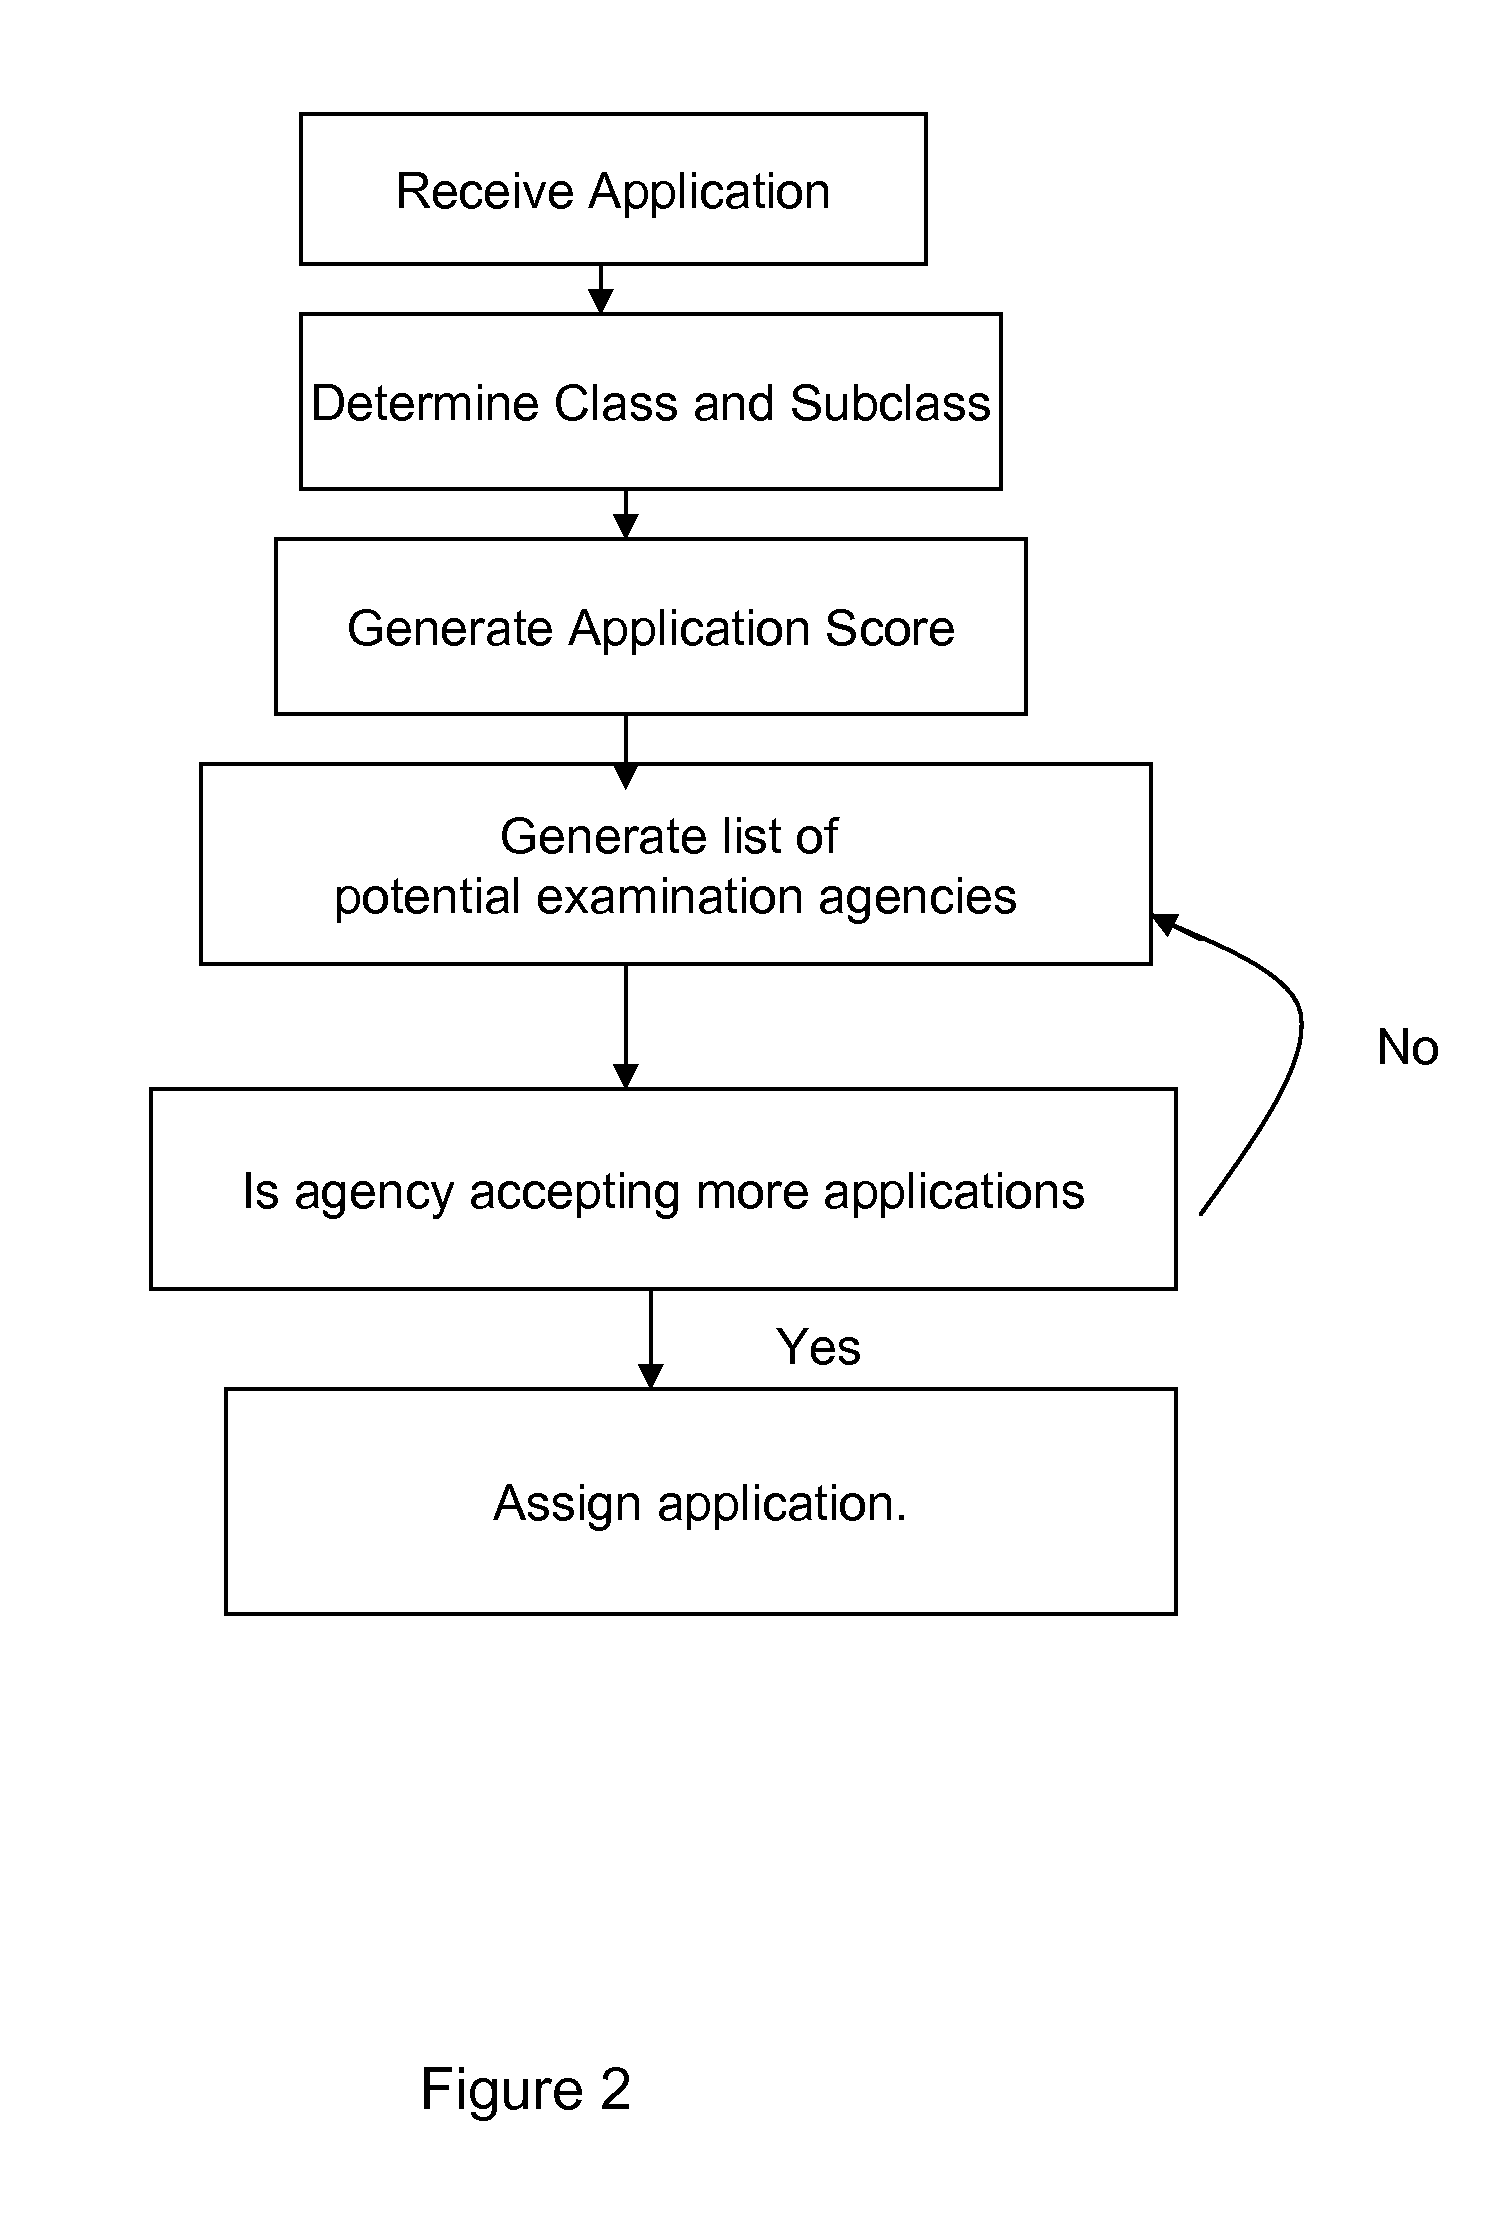 Method and System to Decentralize Patent Examination